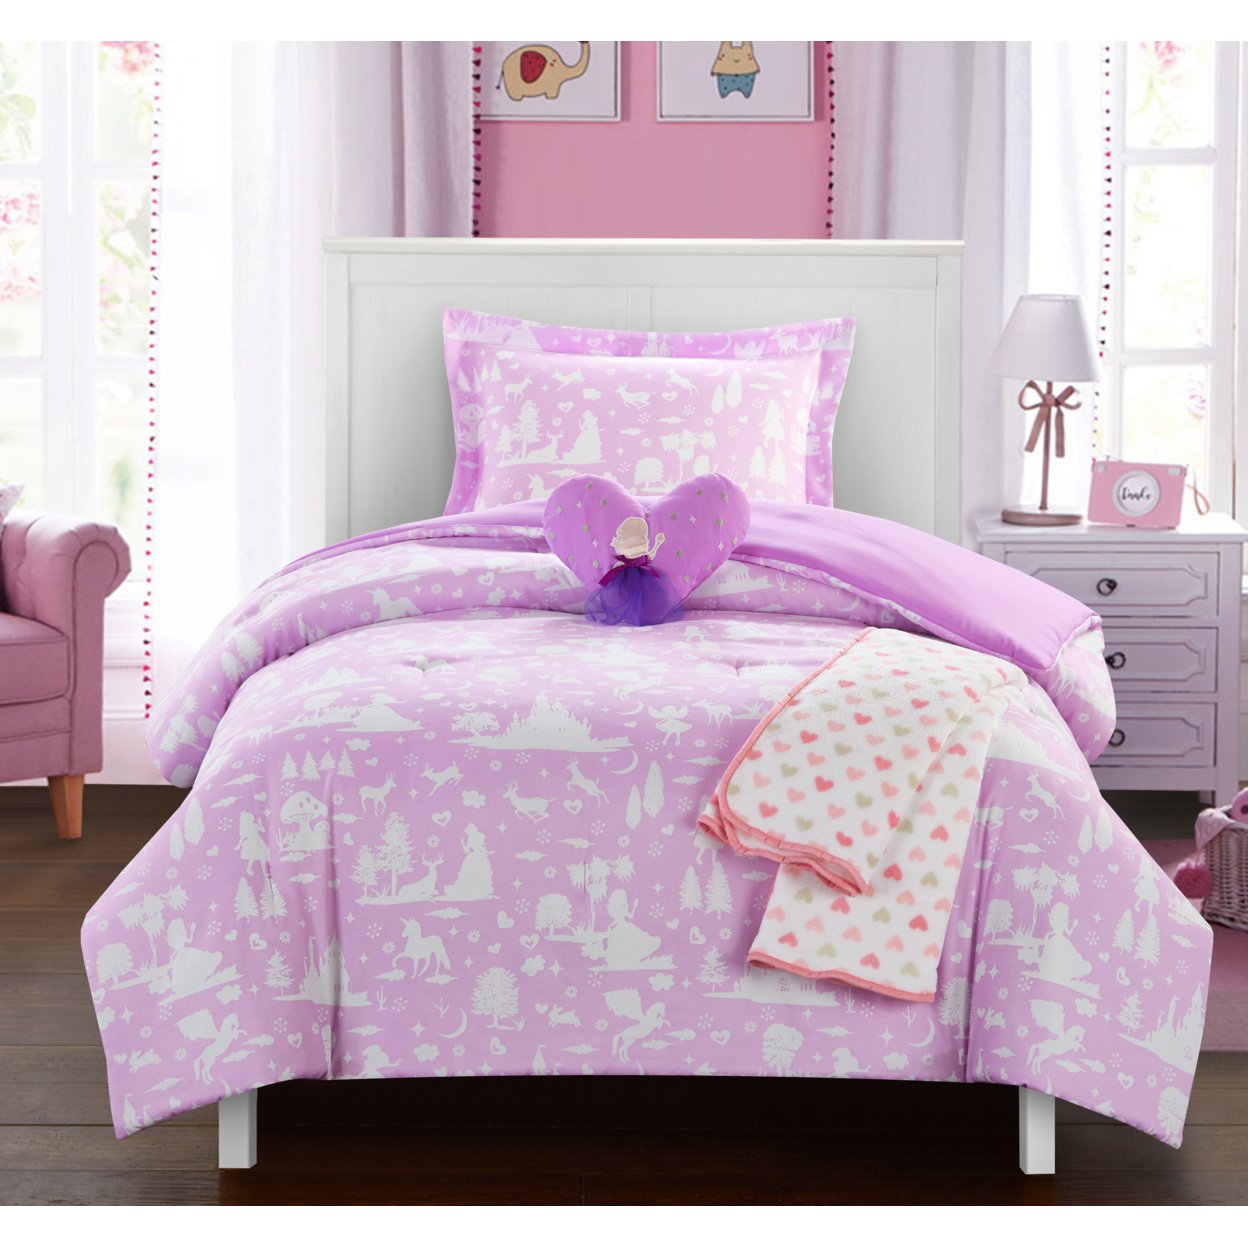 5 Or 4 Piece Comforter Set Youth Design Bedding - Throw Blanket Decorative Pillow Shams Included - Lavender, Twin